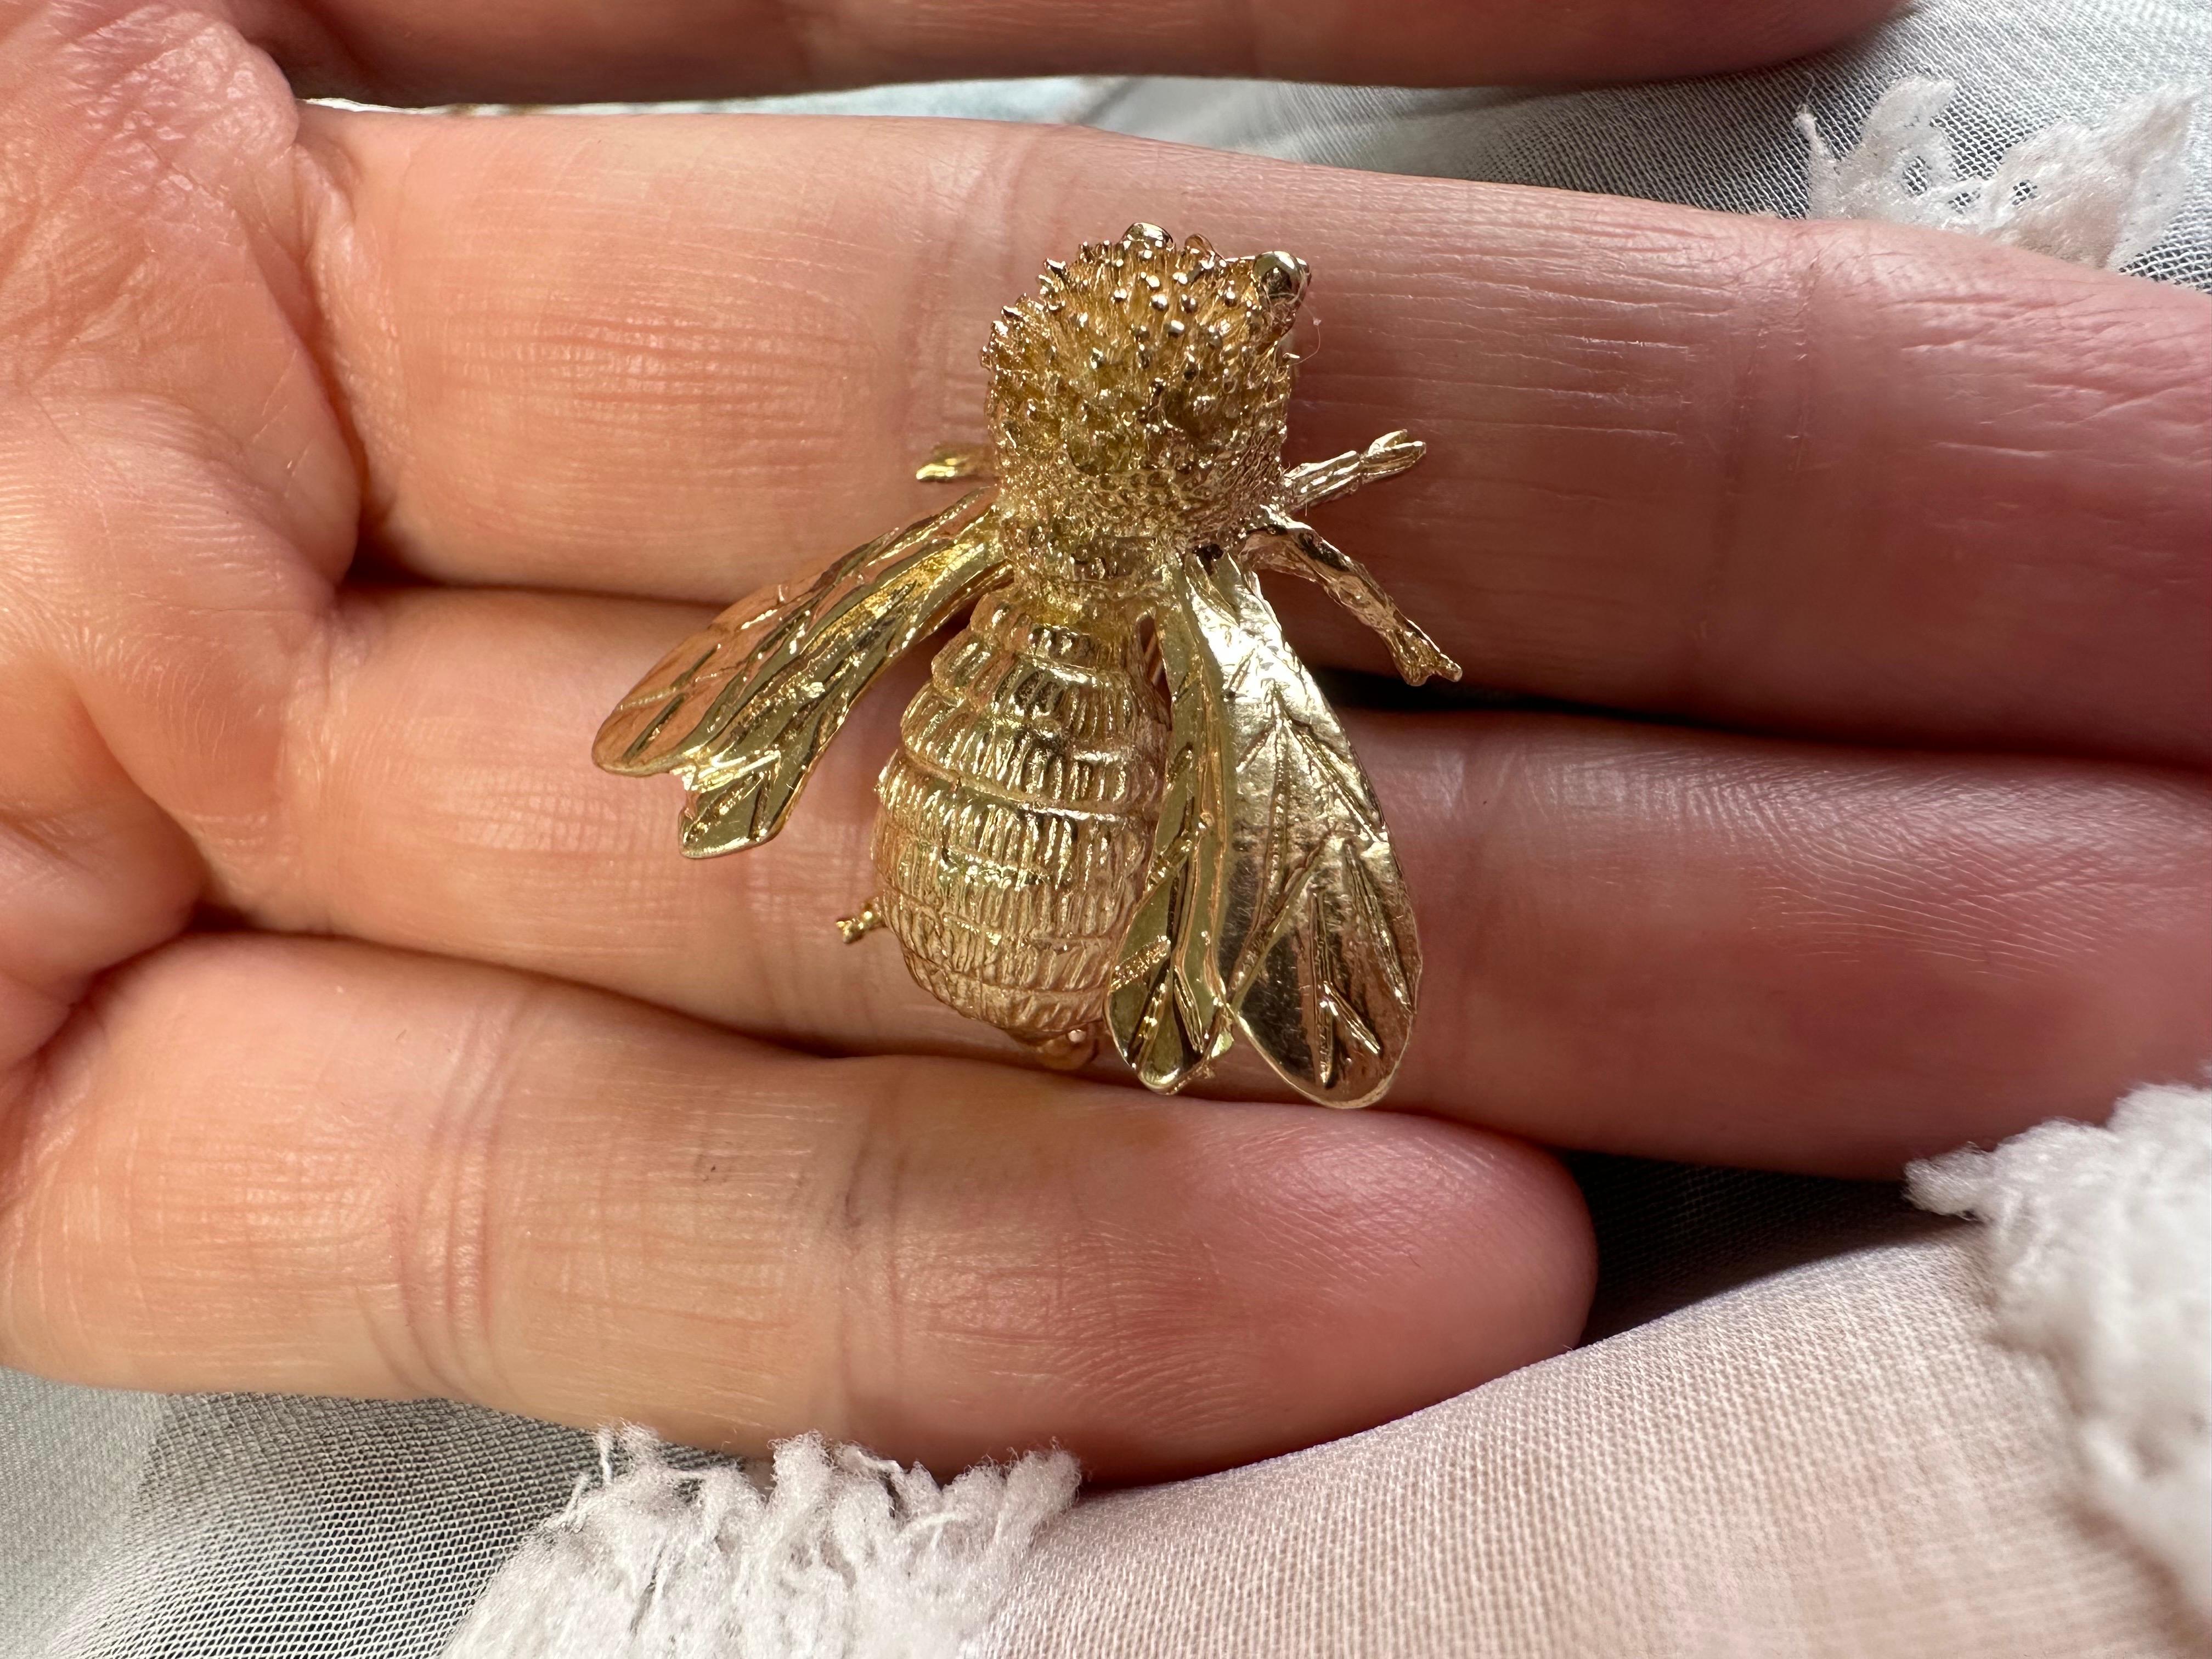 Gold Bee Brooch 14KT yellow gold

METAL: 14KT yellow gold
Grams:8.20
Item45000001 ktk

WHAT YOU GET AT STAMPAR JEWELERS:
Stampar Jewelers, located in the heart of Jupiter, Florida, is a custom jewelry store and studio dedicated to providing 100%